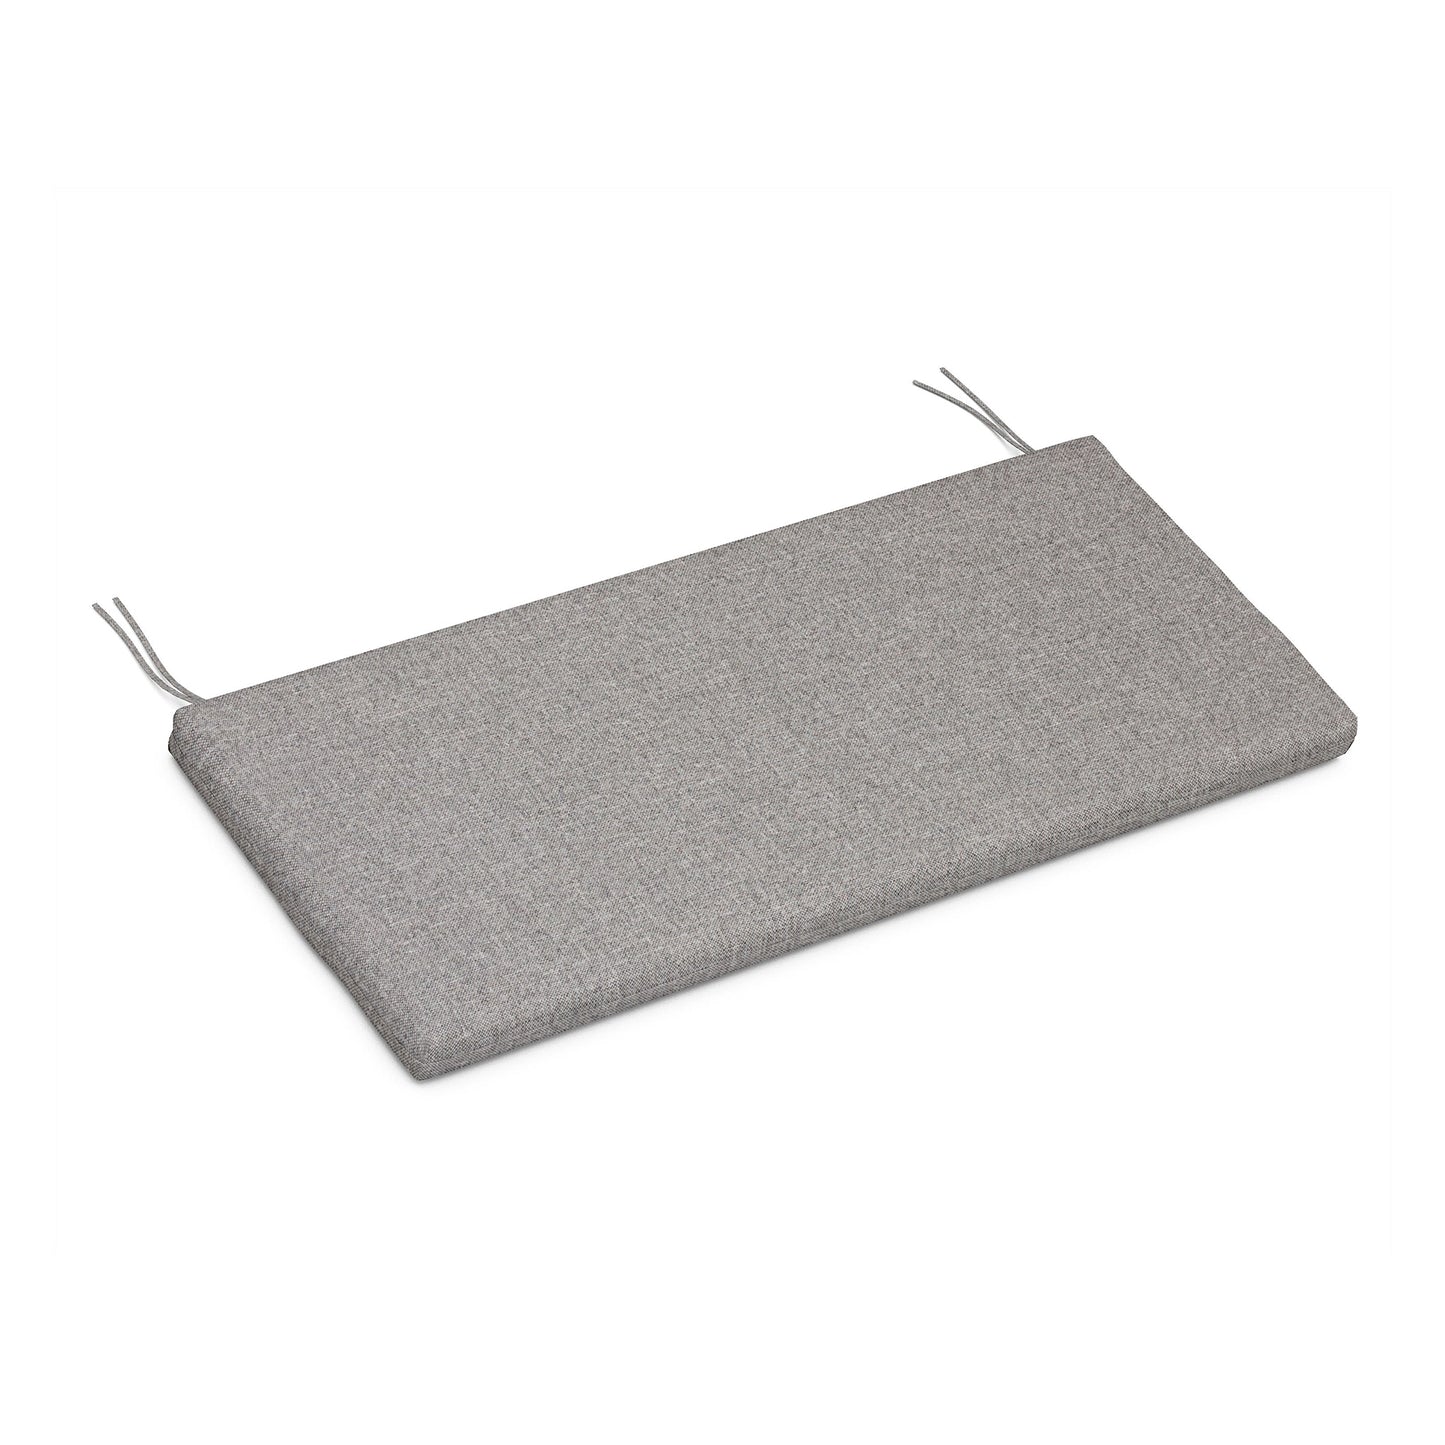 A rectangular XPWS0012 seat cushion in a light gray, weather-resistant upholstery fabric with ties at each end, isolated on a white background from POLYWOOD.